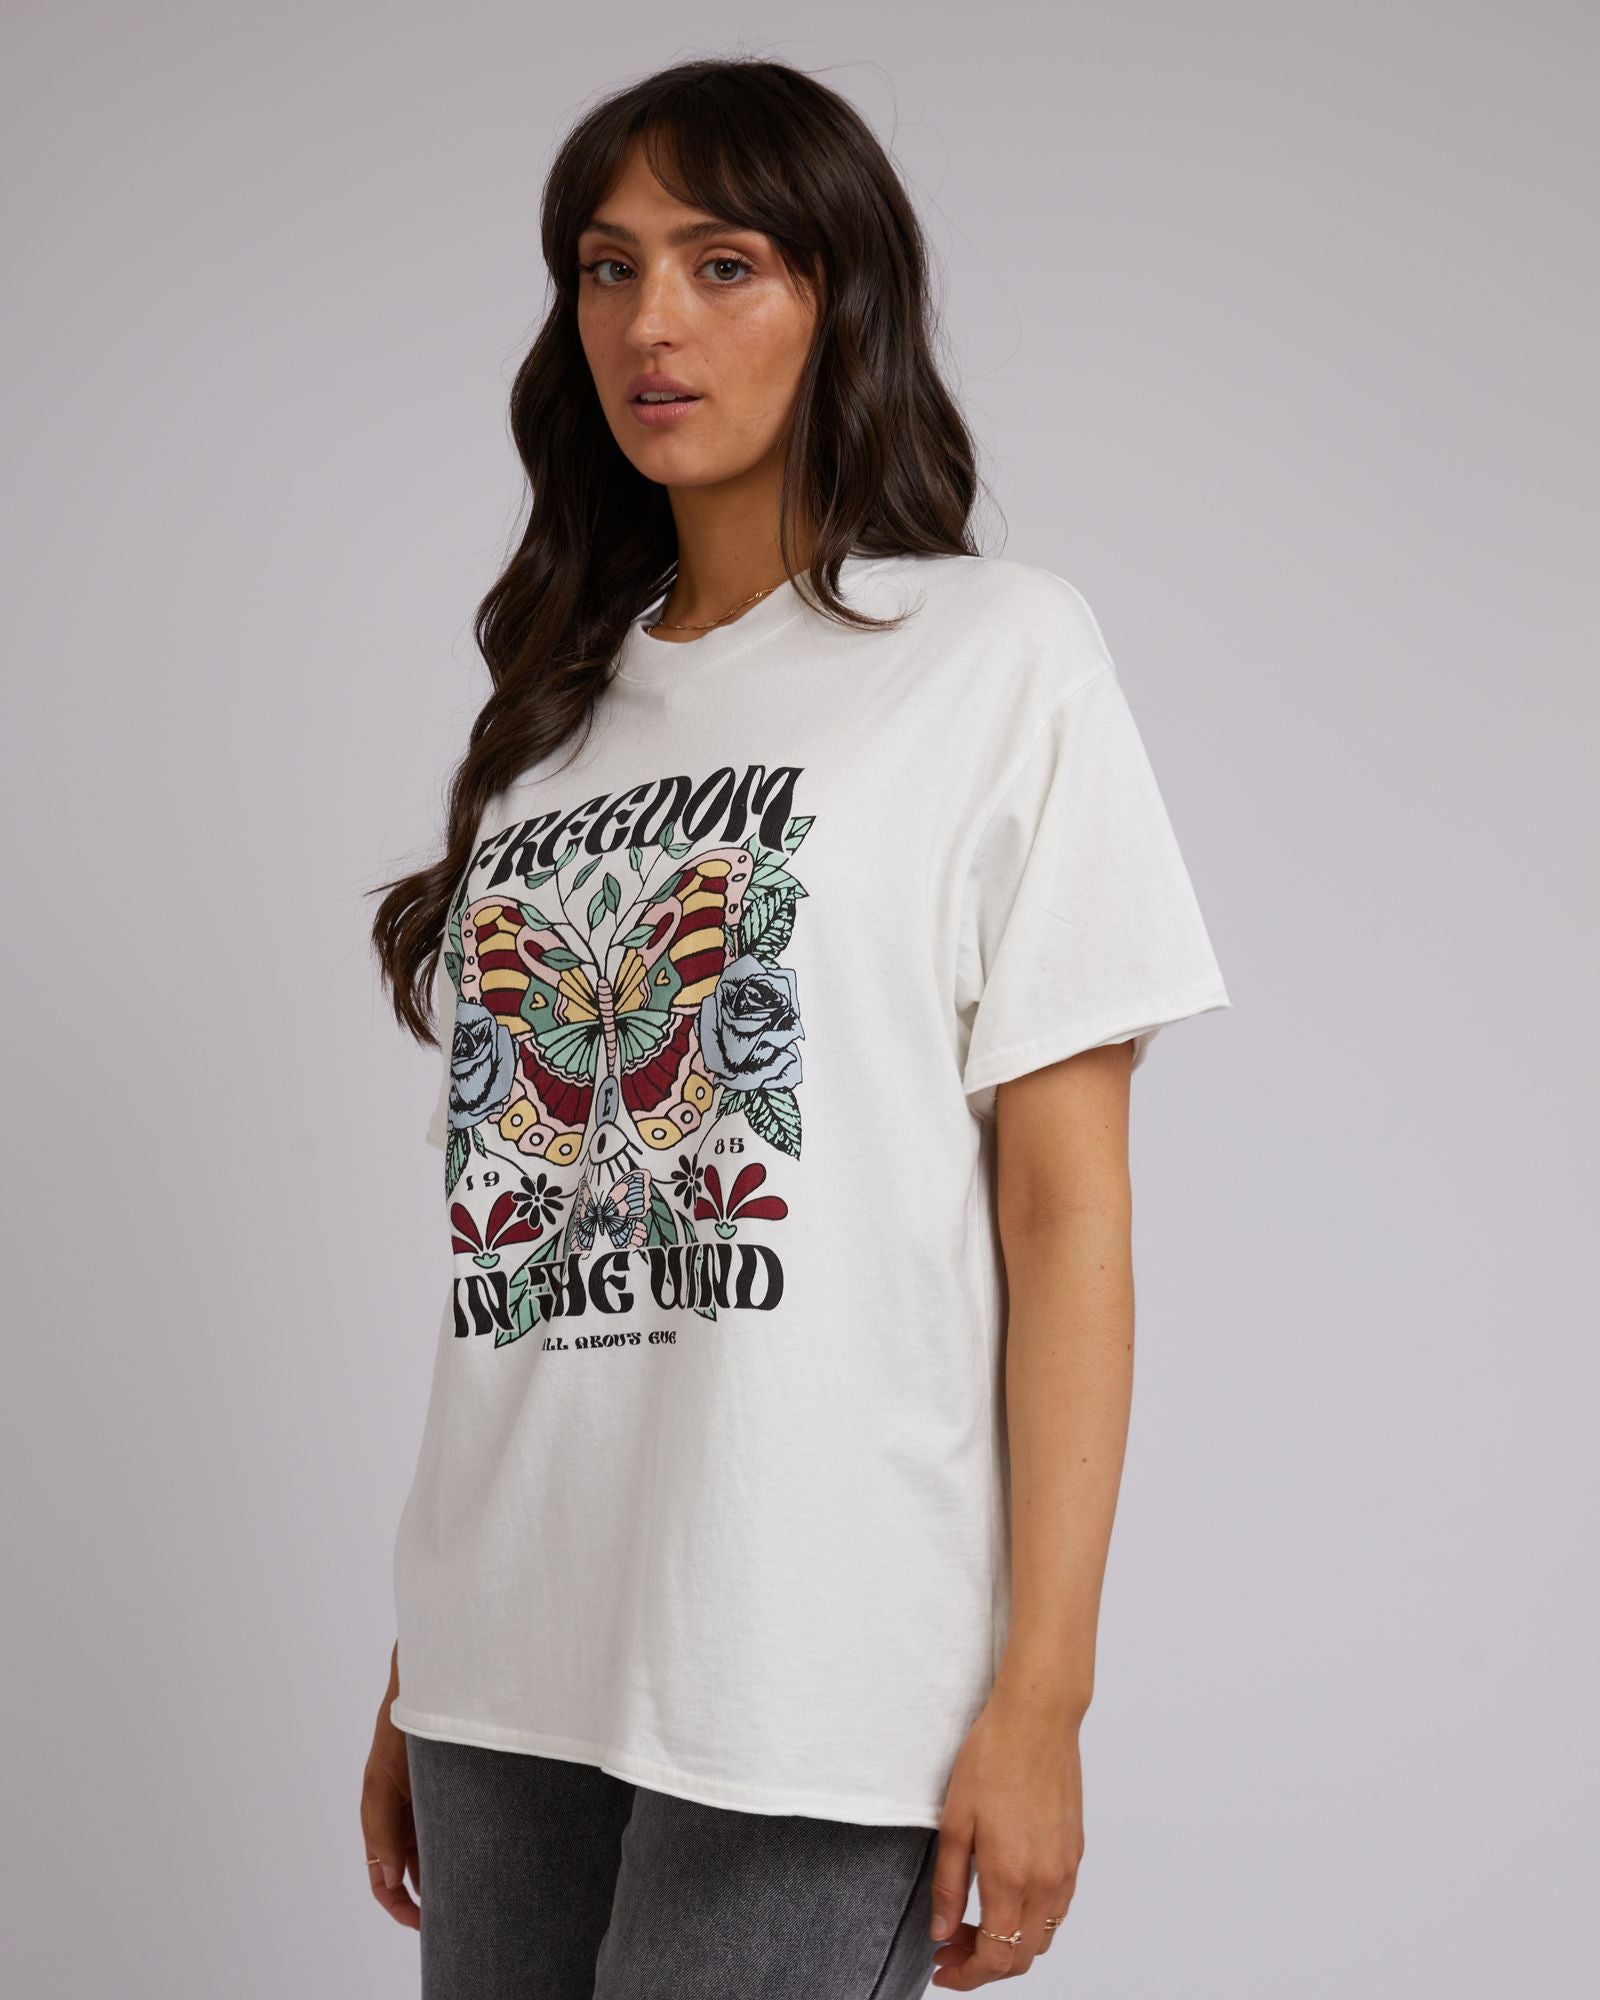 All About Eve In The Wind Tee [COLOUR:White SIZE:6]